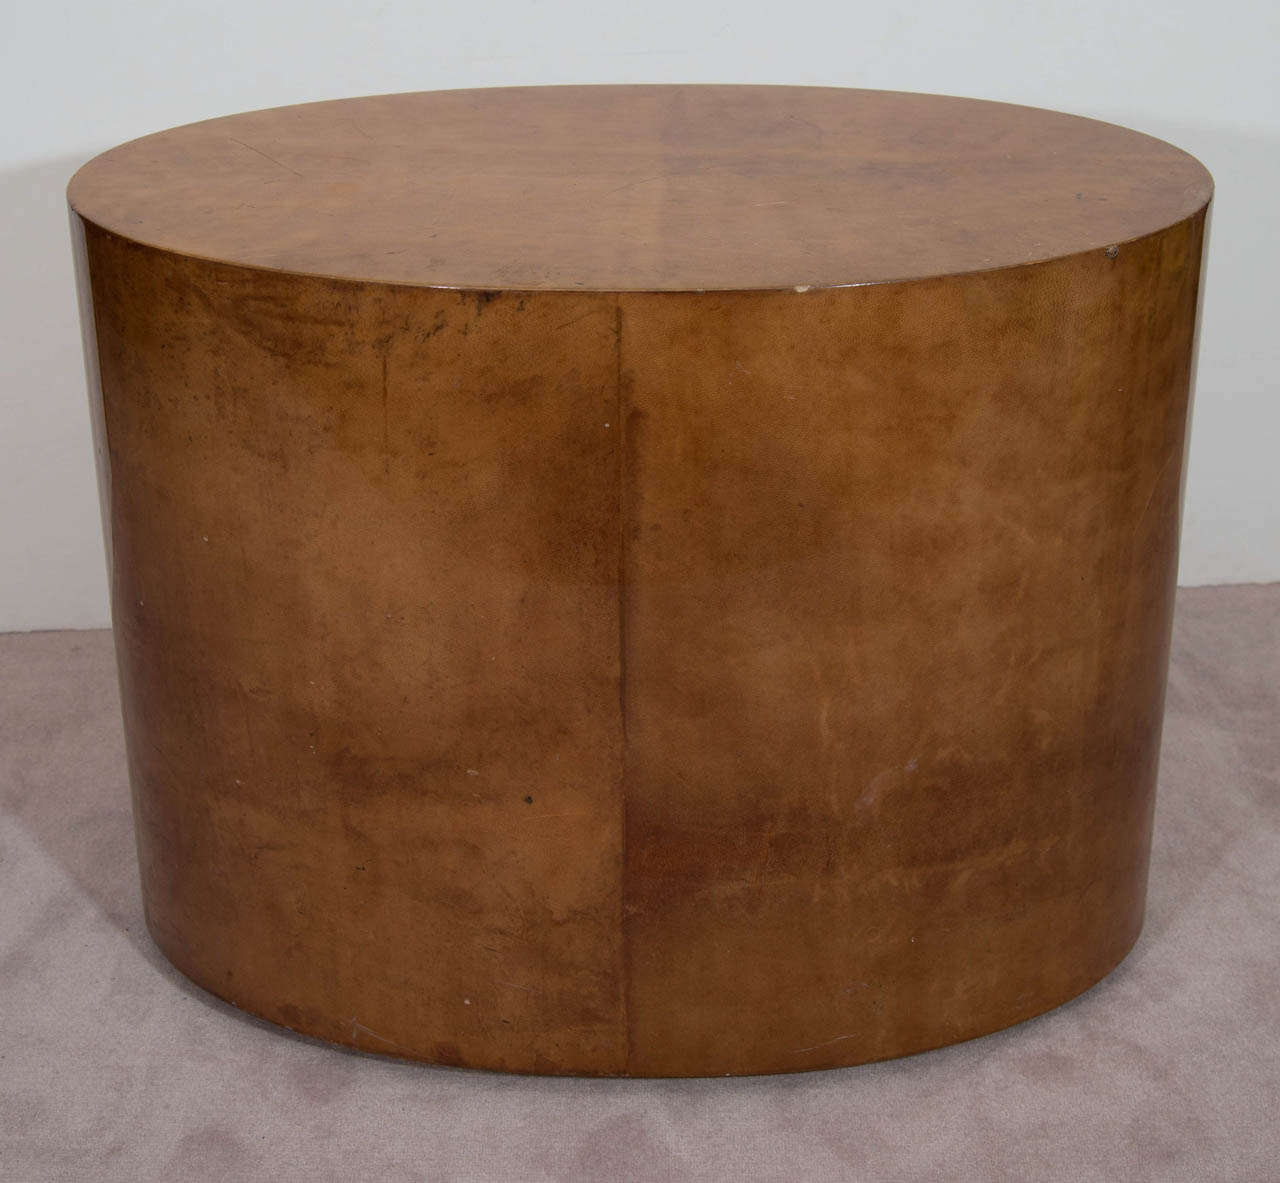 A vintage oval coffee or cocktail table made of lacquered goatskin in the style of Karl Springer.

Vintage condition with some cracks, wear, and loss.